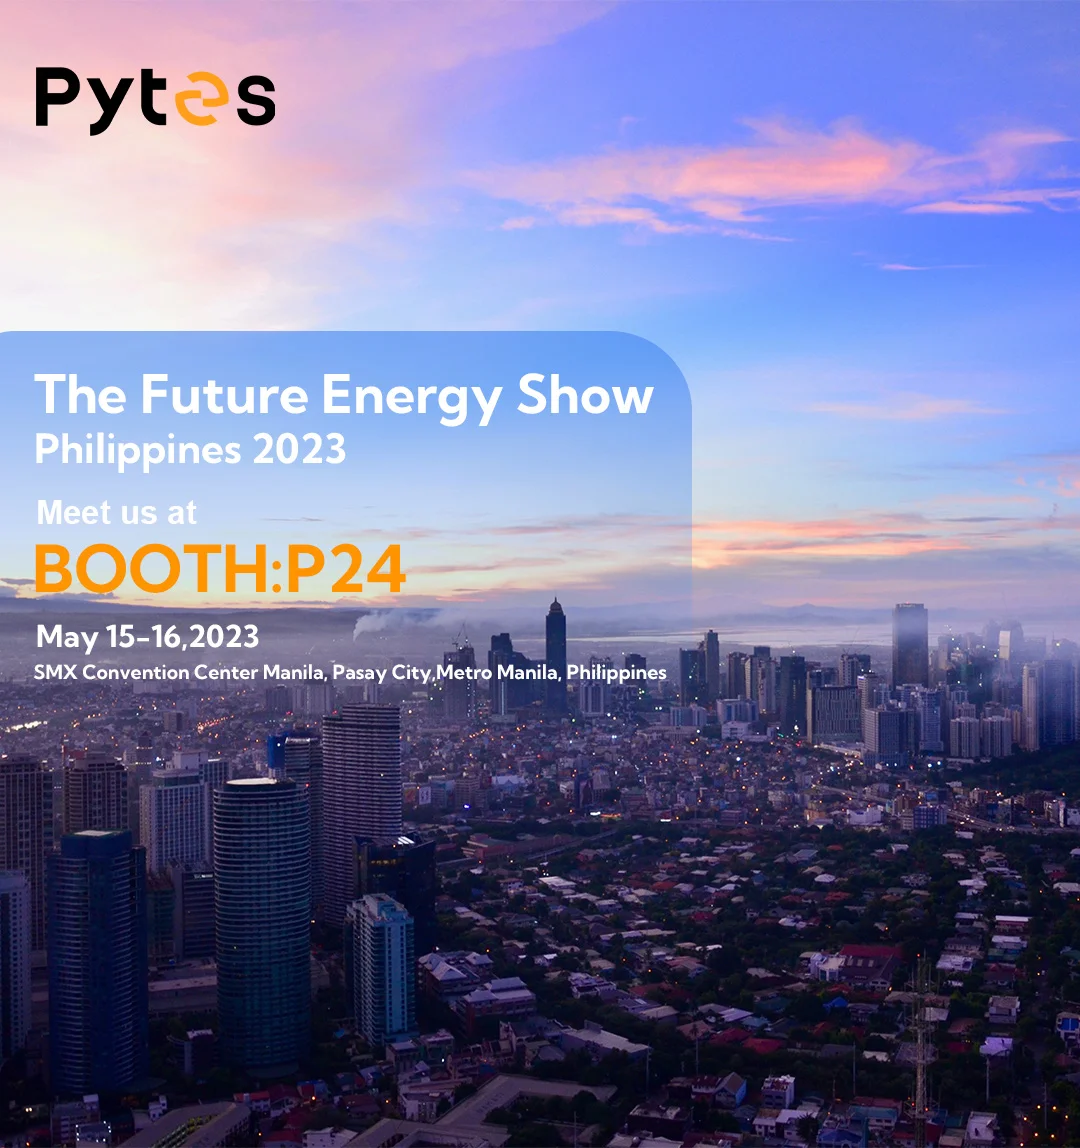 THE FUTURE ENERGY SHOW PHILIPPINES 2023/05/15-2023/05/16